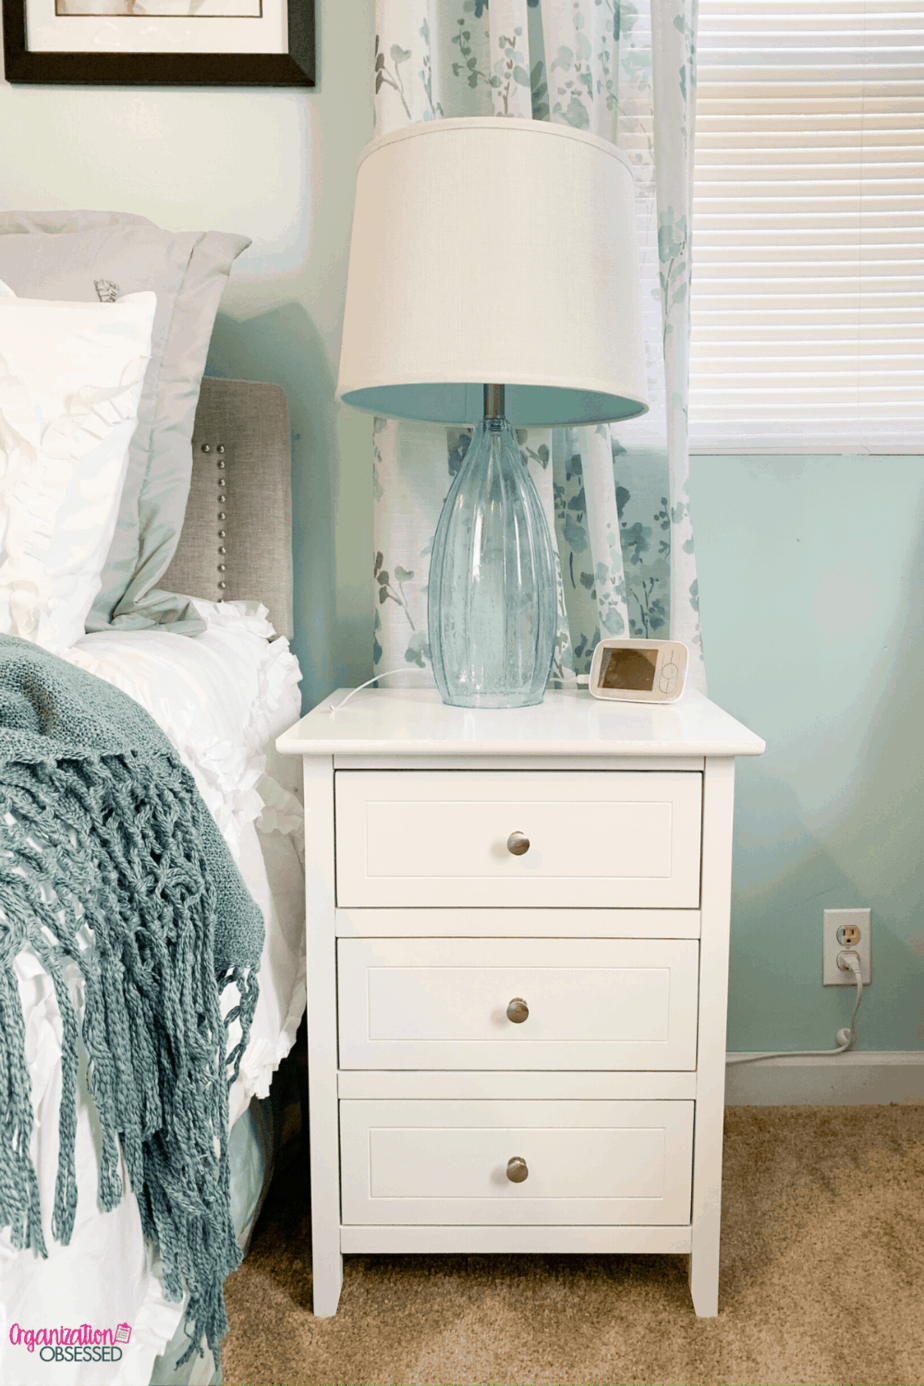 How to Easily Hide Bedside Cords - Organization Obsessed